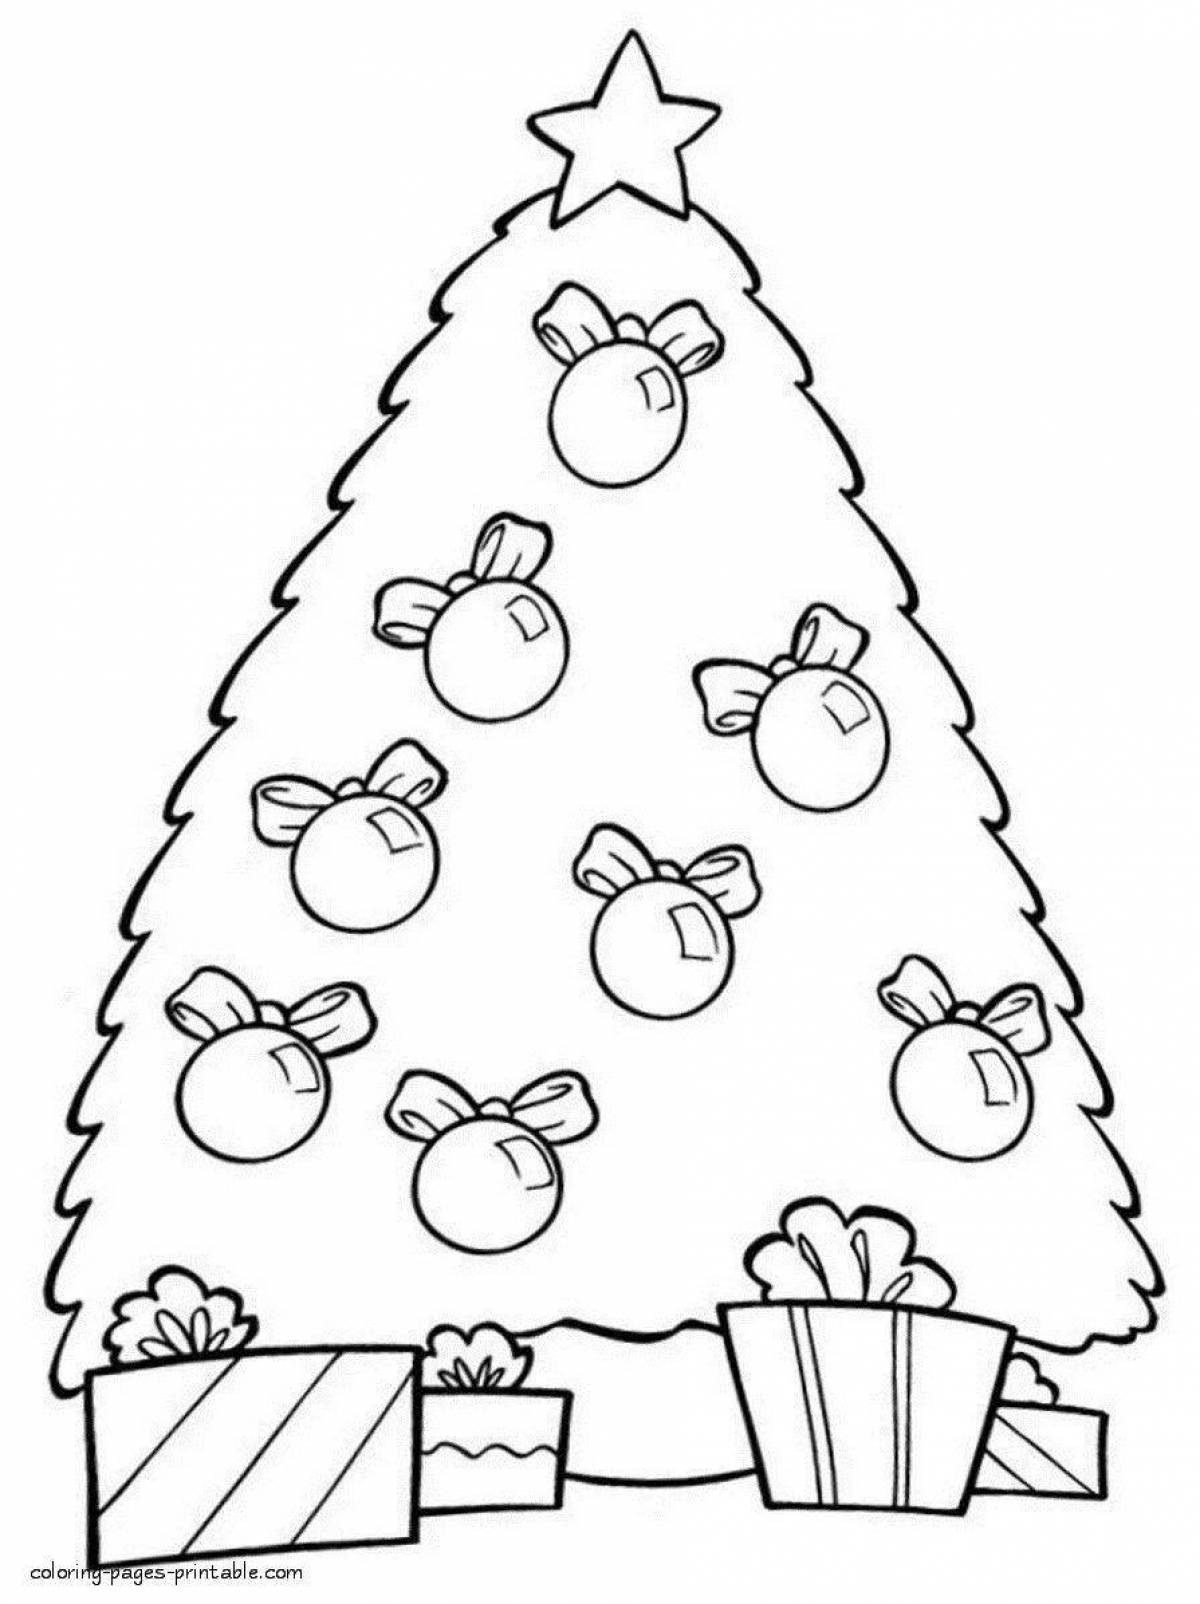 Colorful christmas tree coloring page for little ones